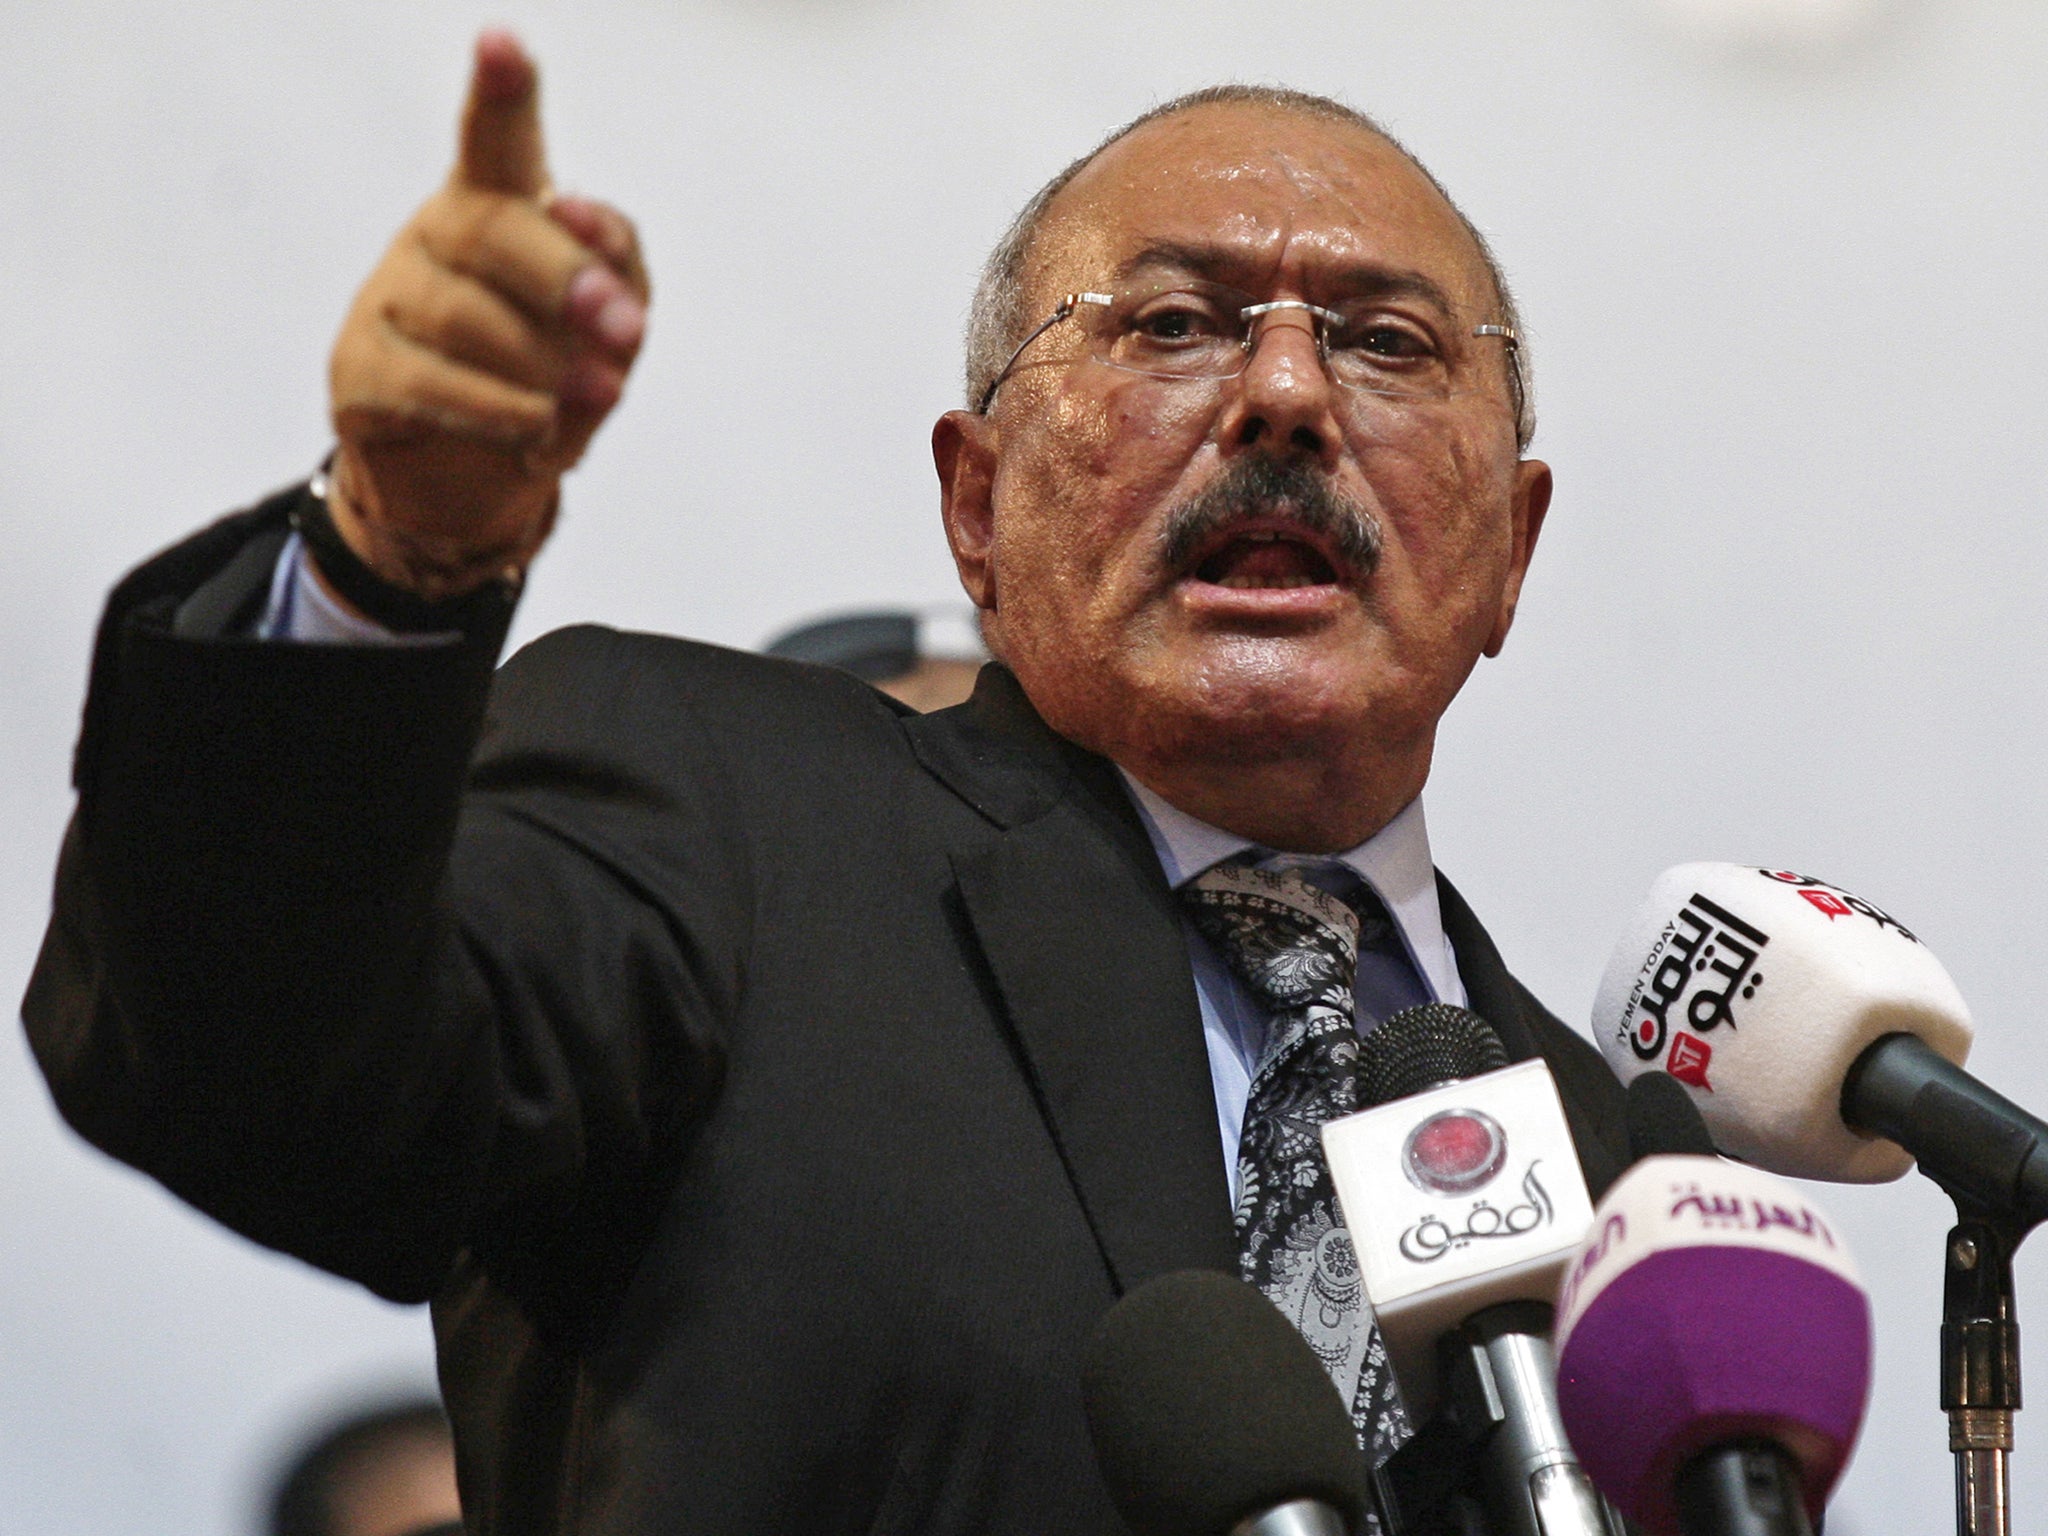 Saleh once described his job as ‘dancing on the heads of snakes’